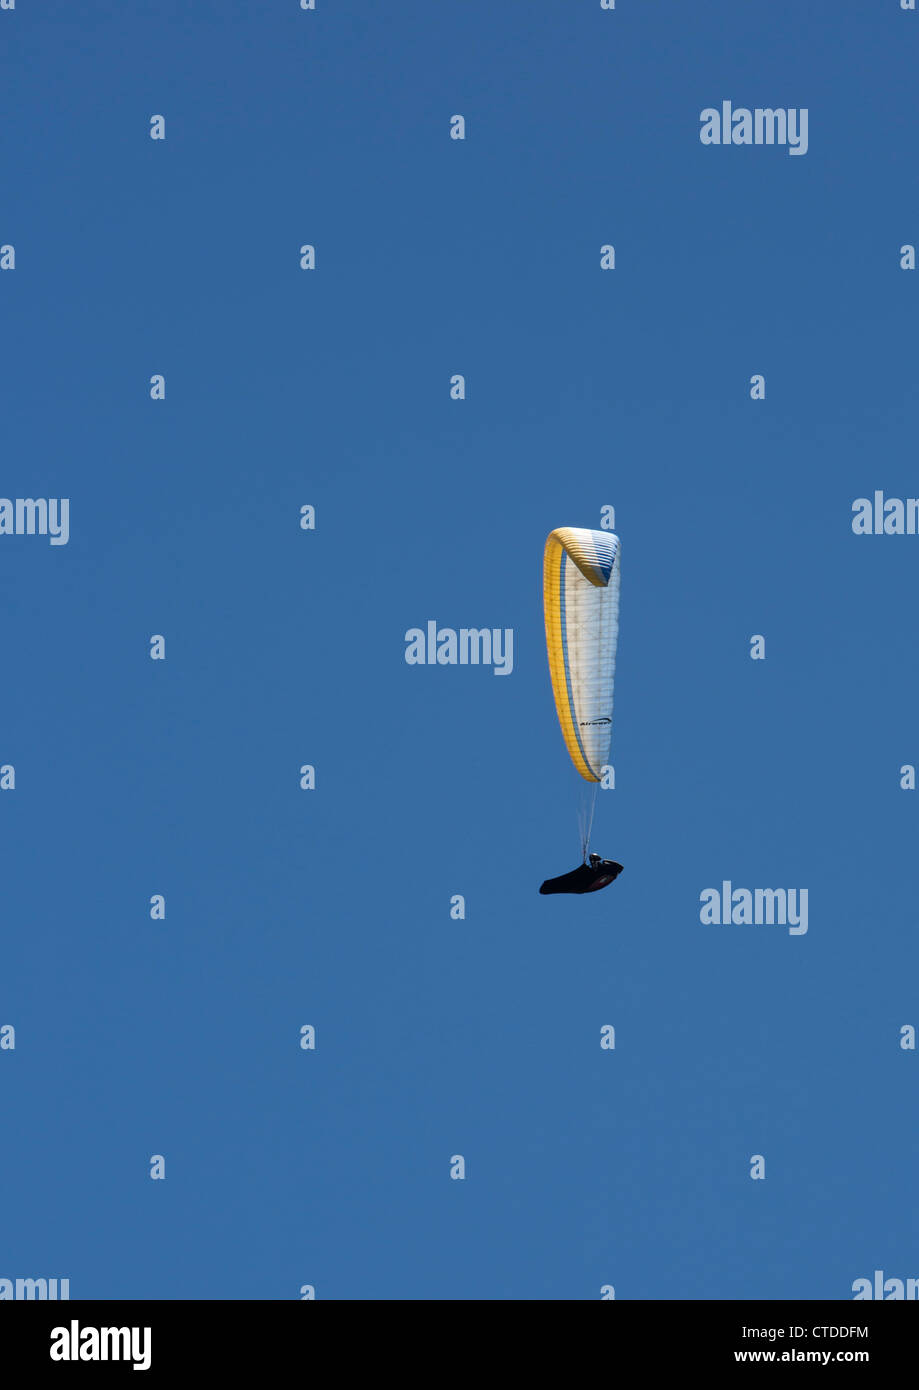 Twin Peaks, California - A paraglider soars above the San Gabriel Valley. Stock Photo